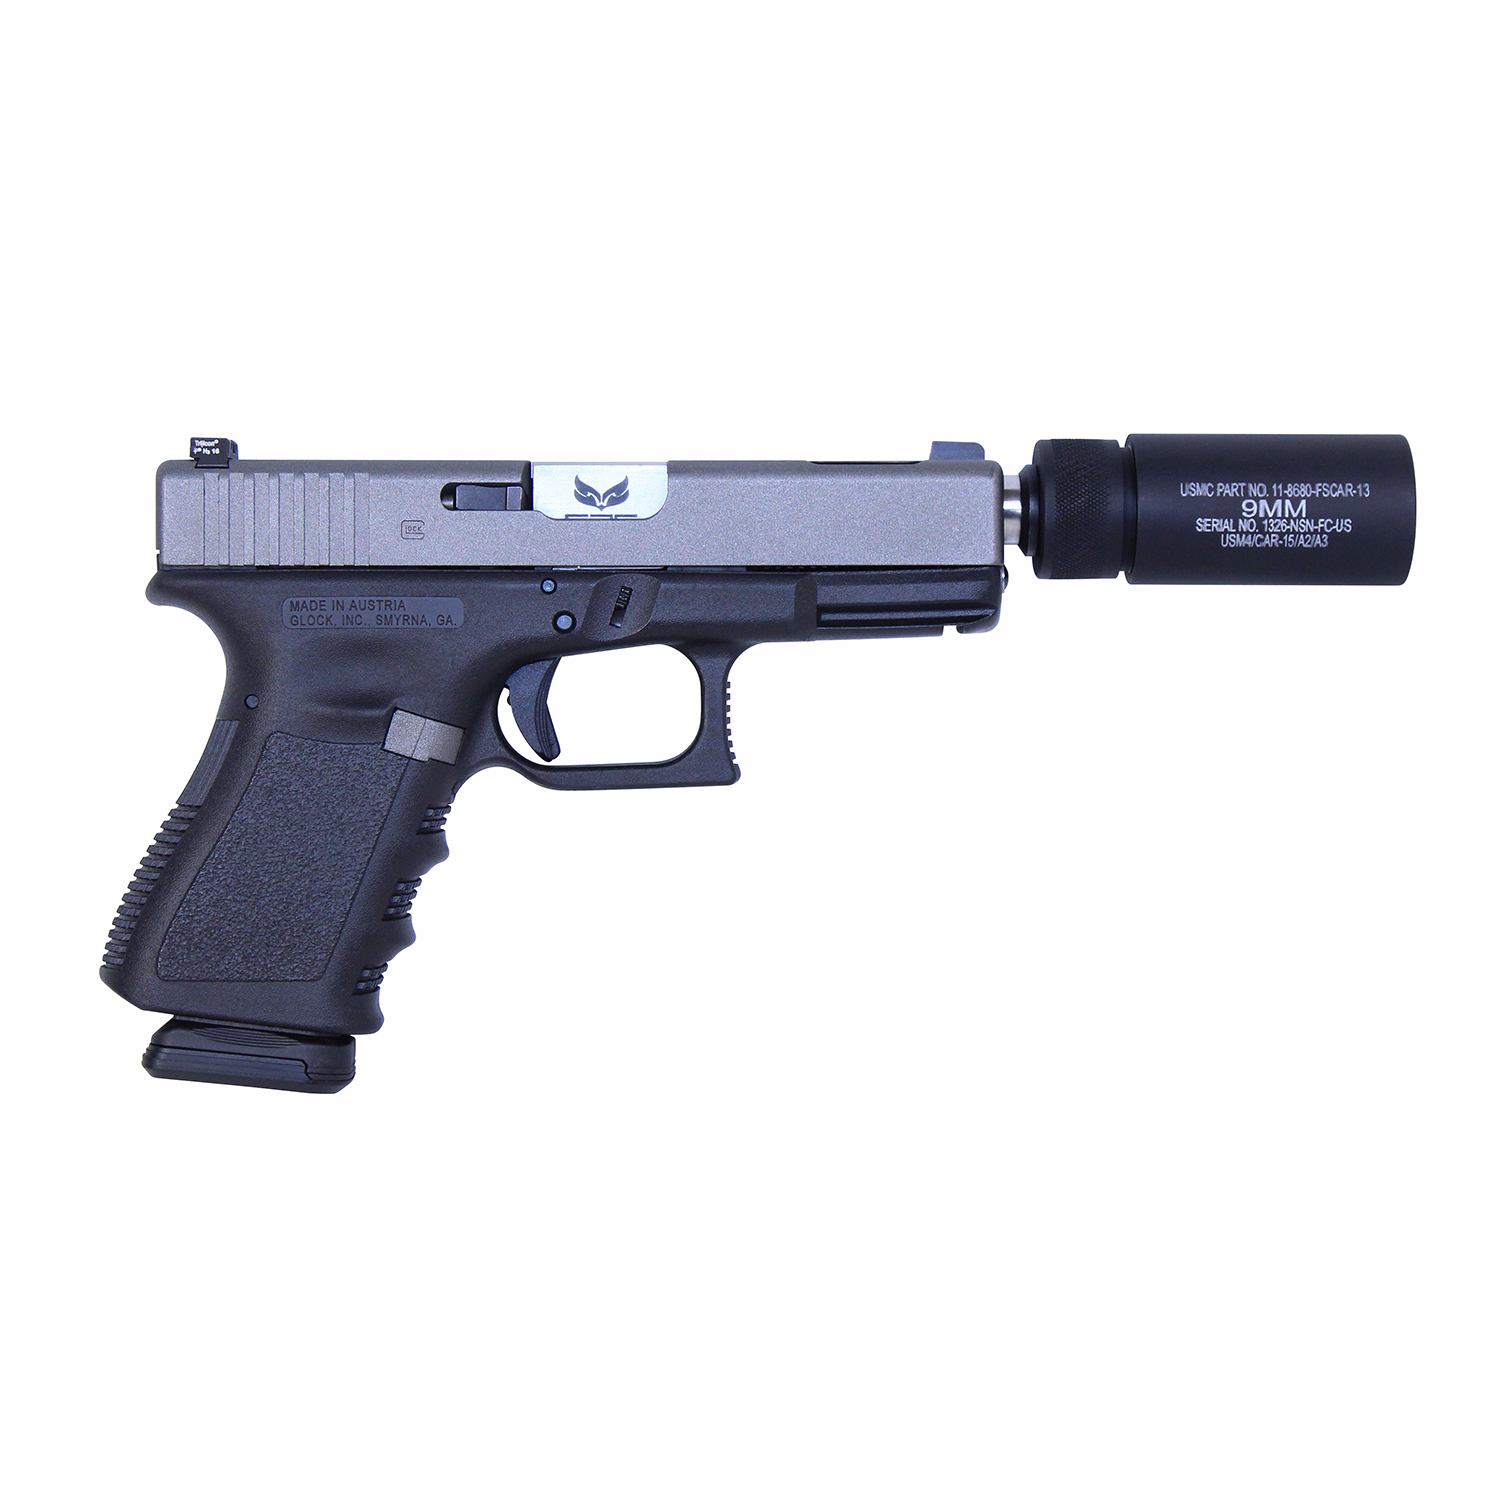 Handgun with a 3-inch anodized black fake suppressor attached, laser-engraved